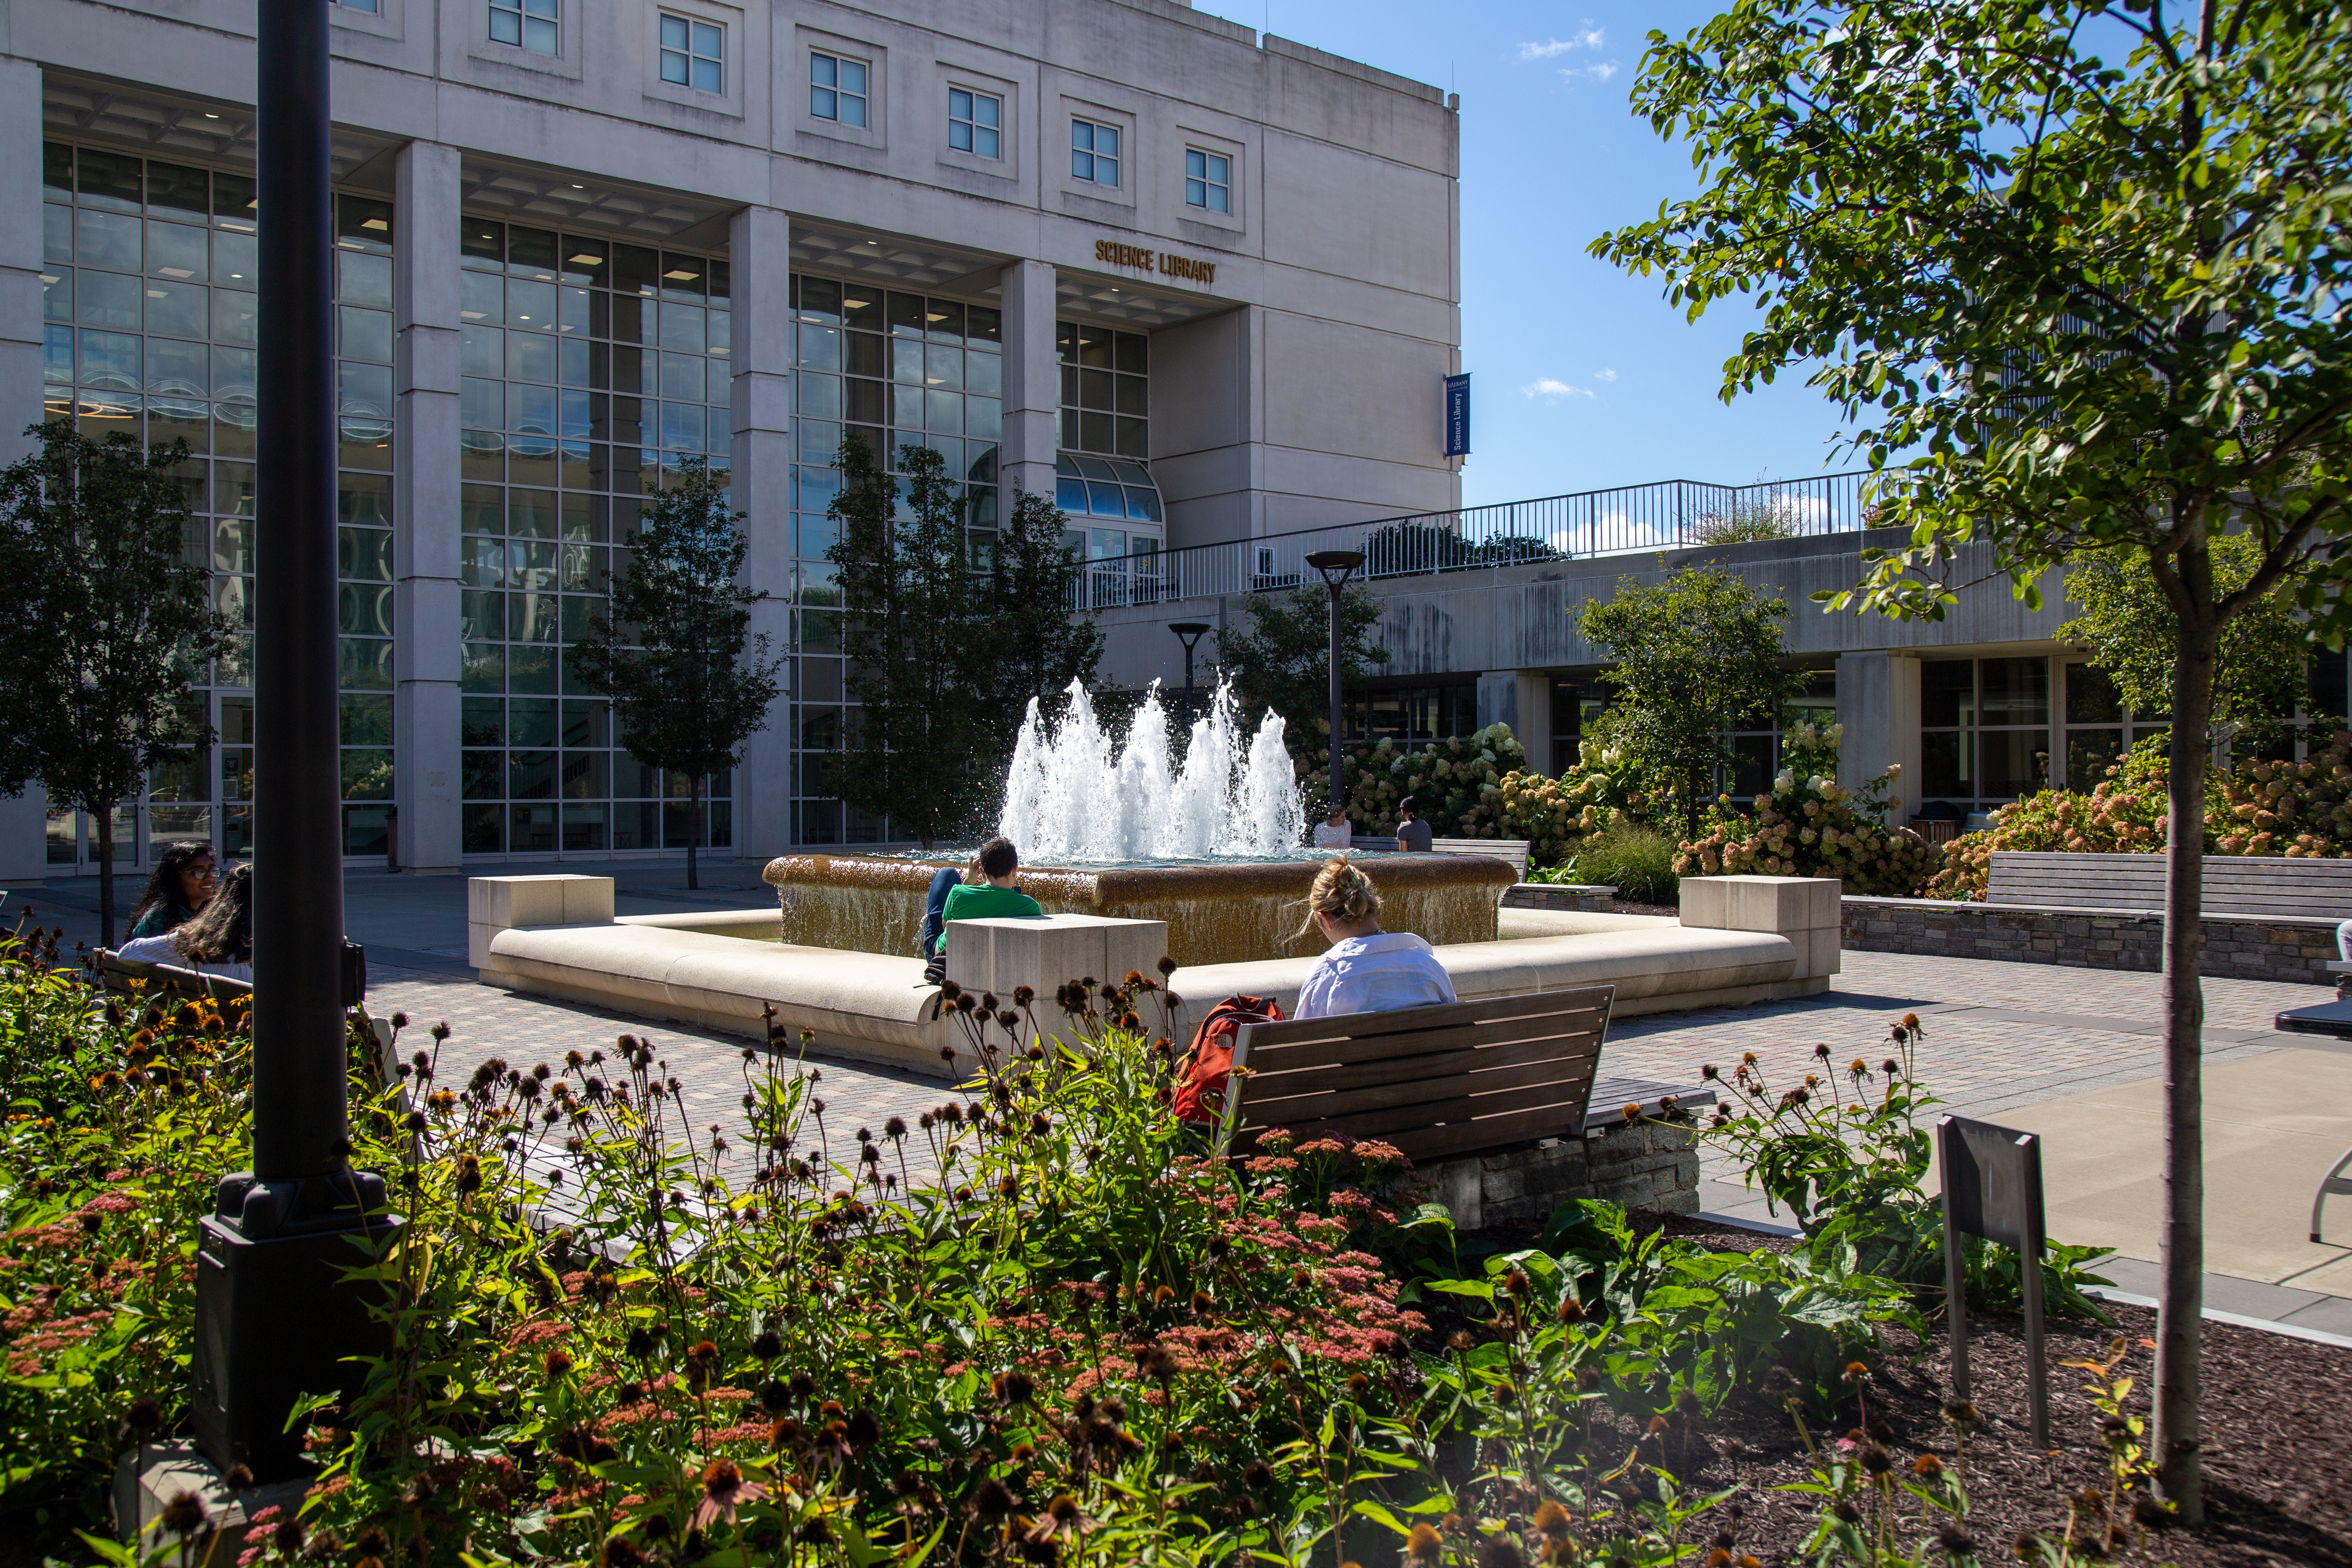 Students sitting outside of the Science Library, near the Parents' Fountain